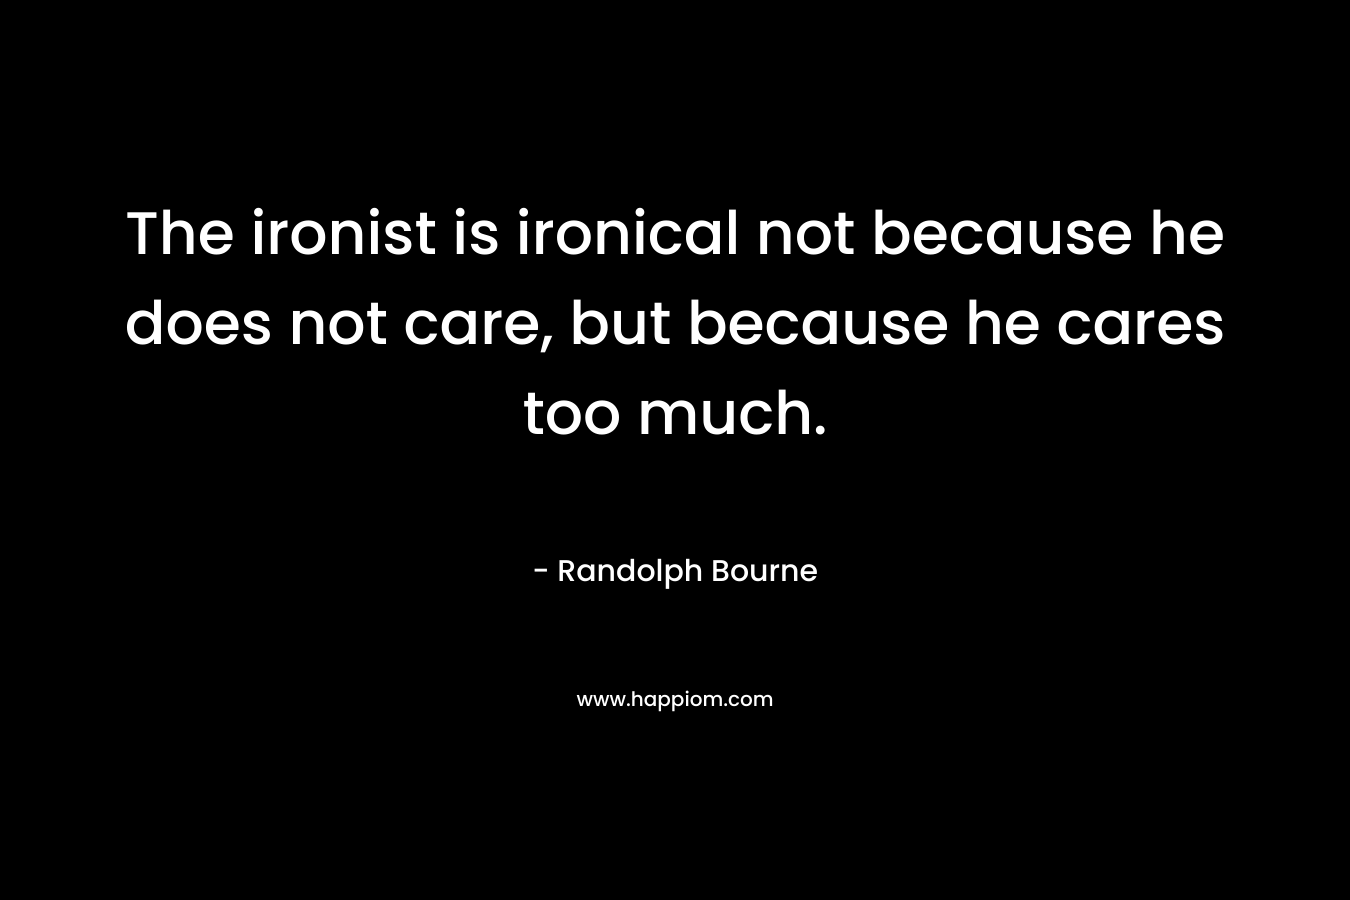 The ironist is ironical not because he does not care, but because he cares too much. – Randolph Bourne